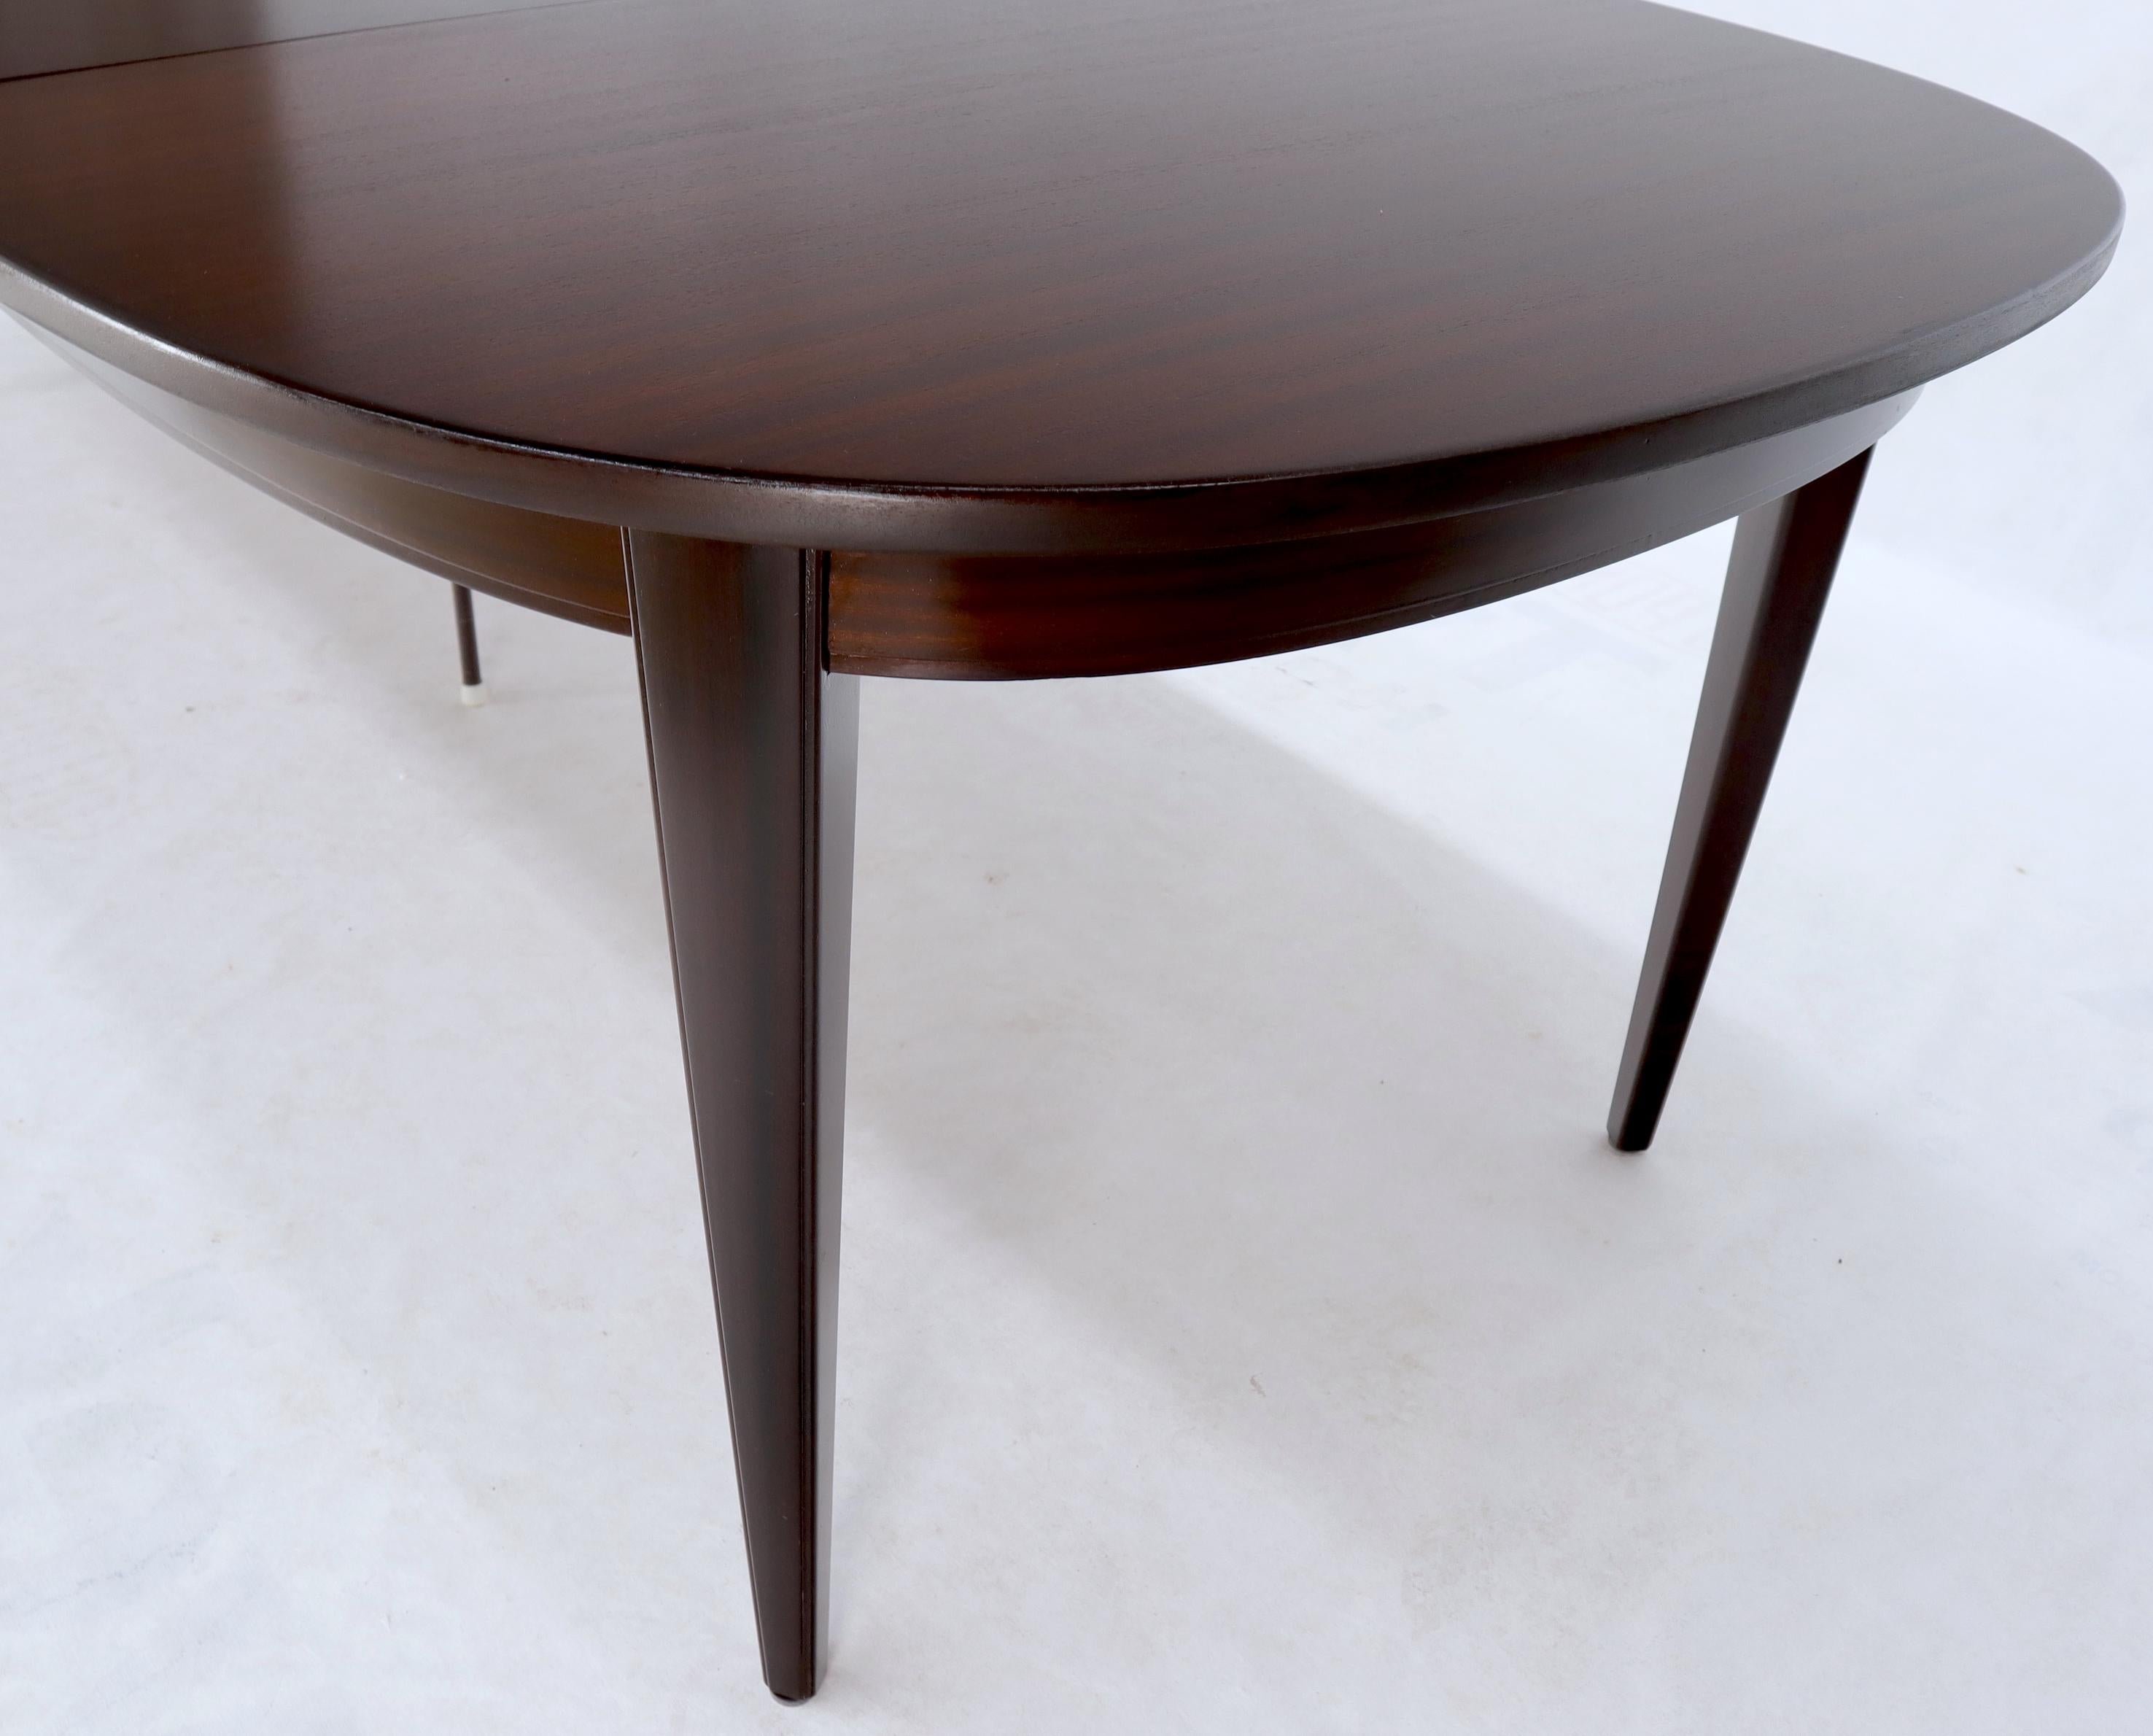 Lacquered Danish Mid-Century Modern Espresso Mahogany Oval Dining Table w/ Two Extensions